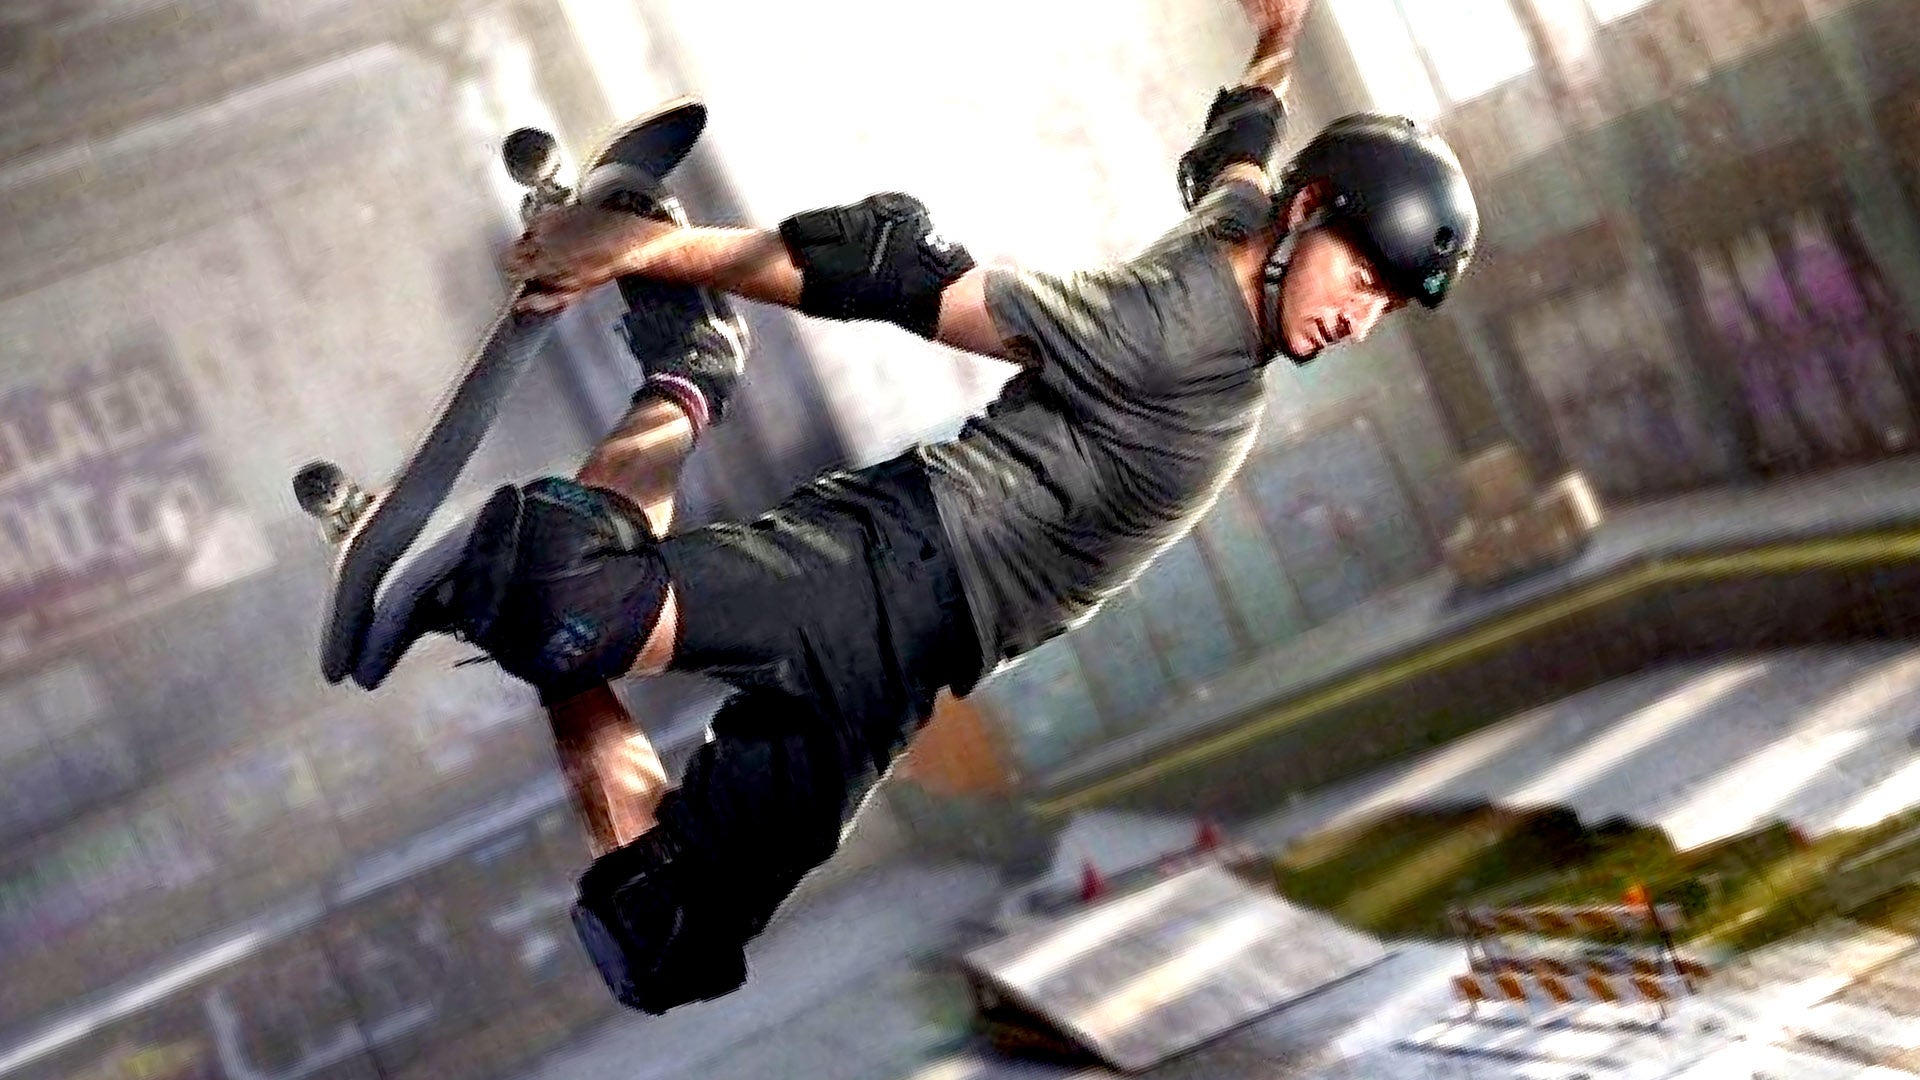 Image for DF Retro EX: Tony Hawk's Pro Skater 1+2 - A Brilliant Remake of a Classic Gaming Series!